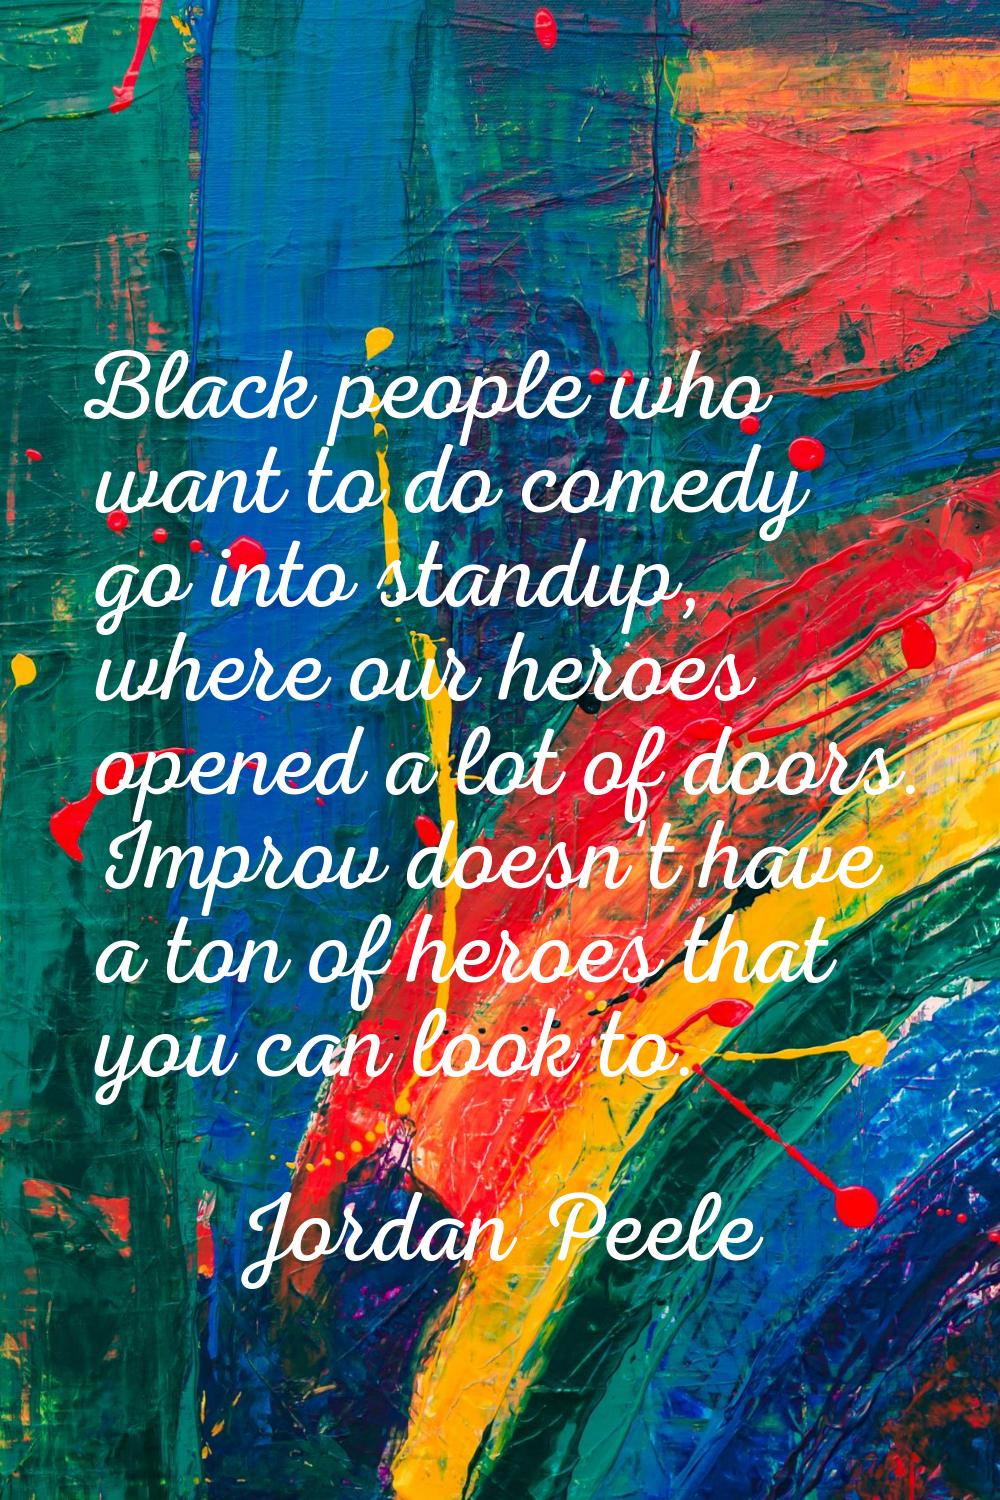 Black people who want to do comedy go into standup, where our heroes opened a lot of doors. Improv 